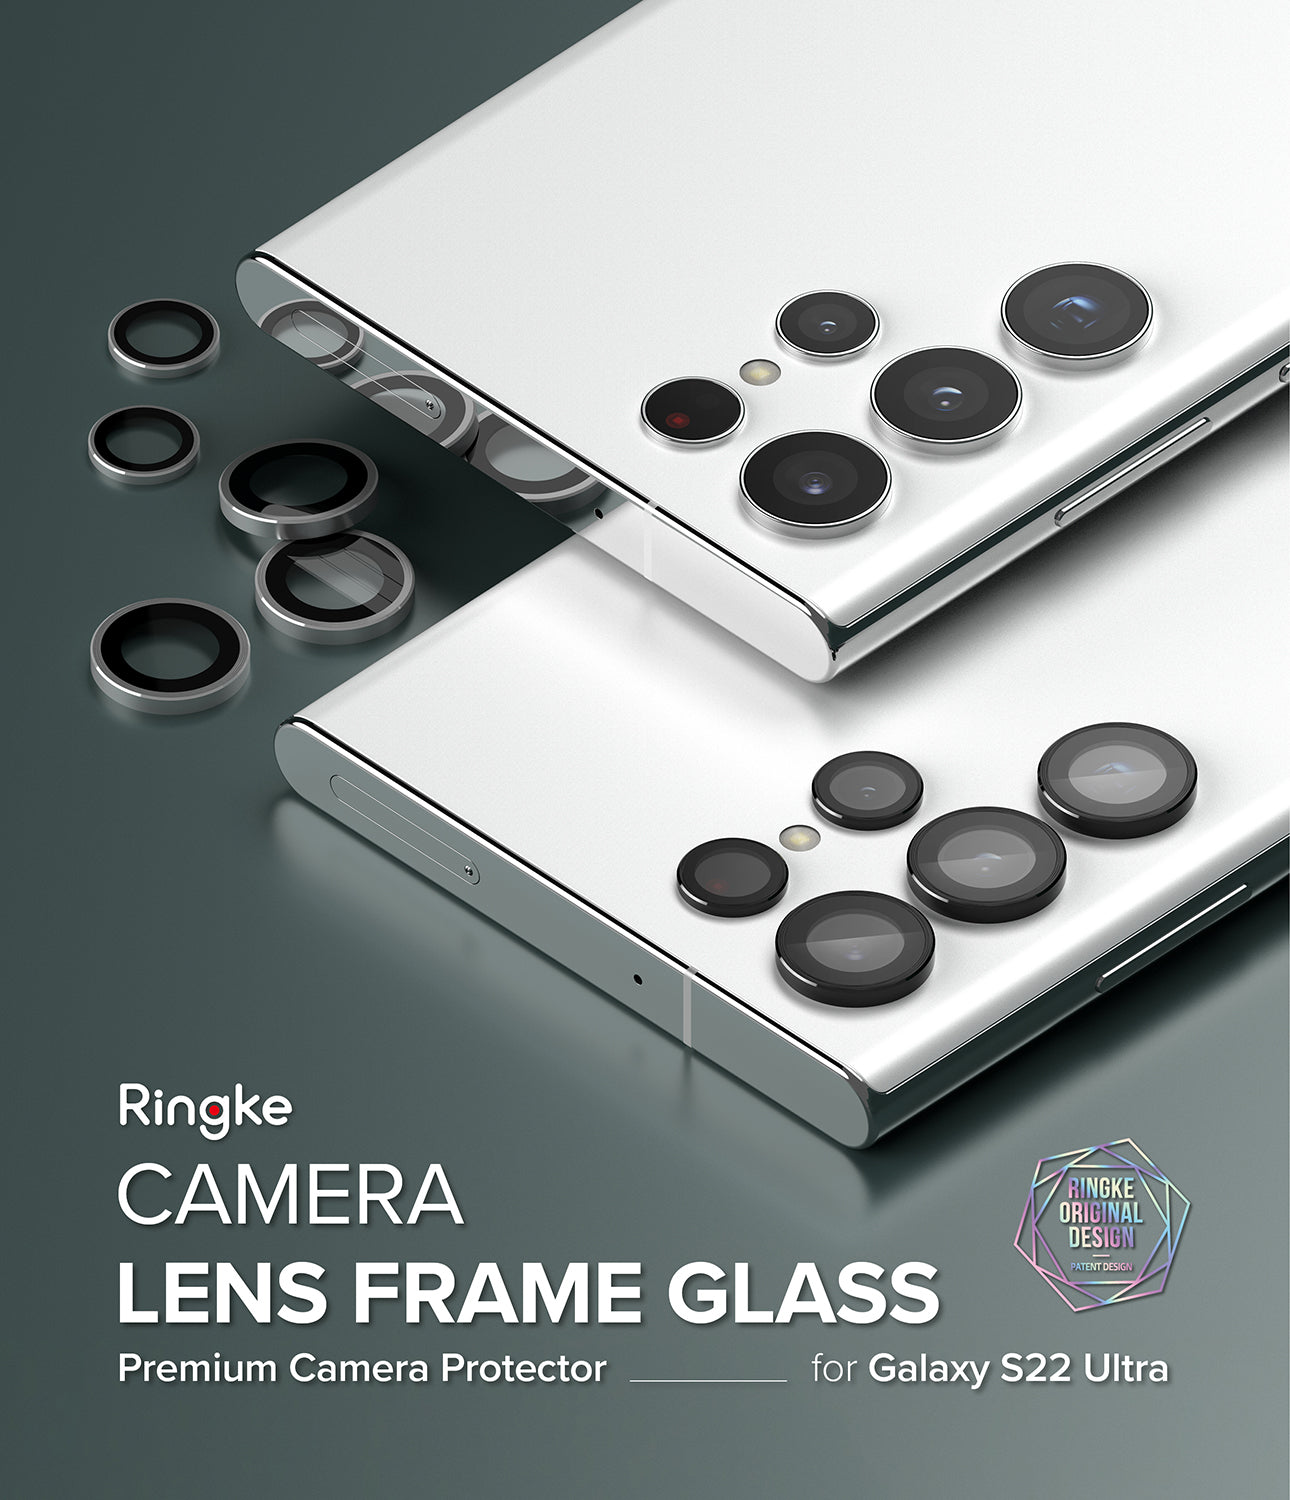 Galaxy S22 Ultra Camera Lens Protector | Camera Lens Frame Glass - Ringke Official Store